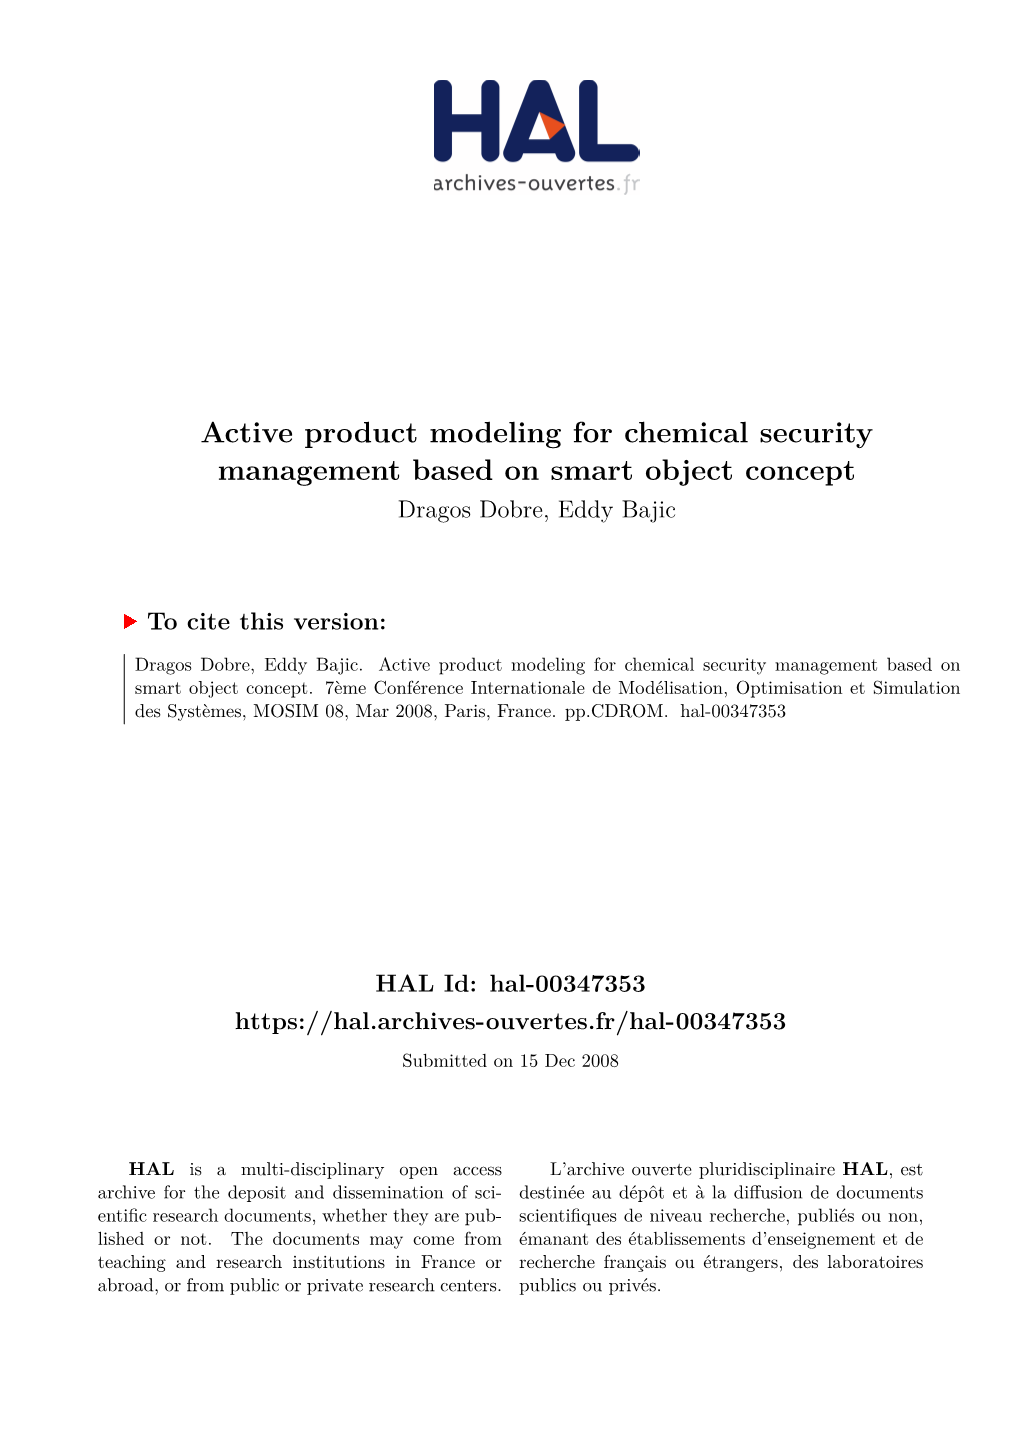 Active Product Modeling for Chemical Security Management Based on Smart Object Concept Dragos Dobre, Eddy Bajic